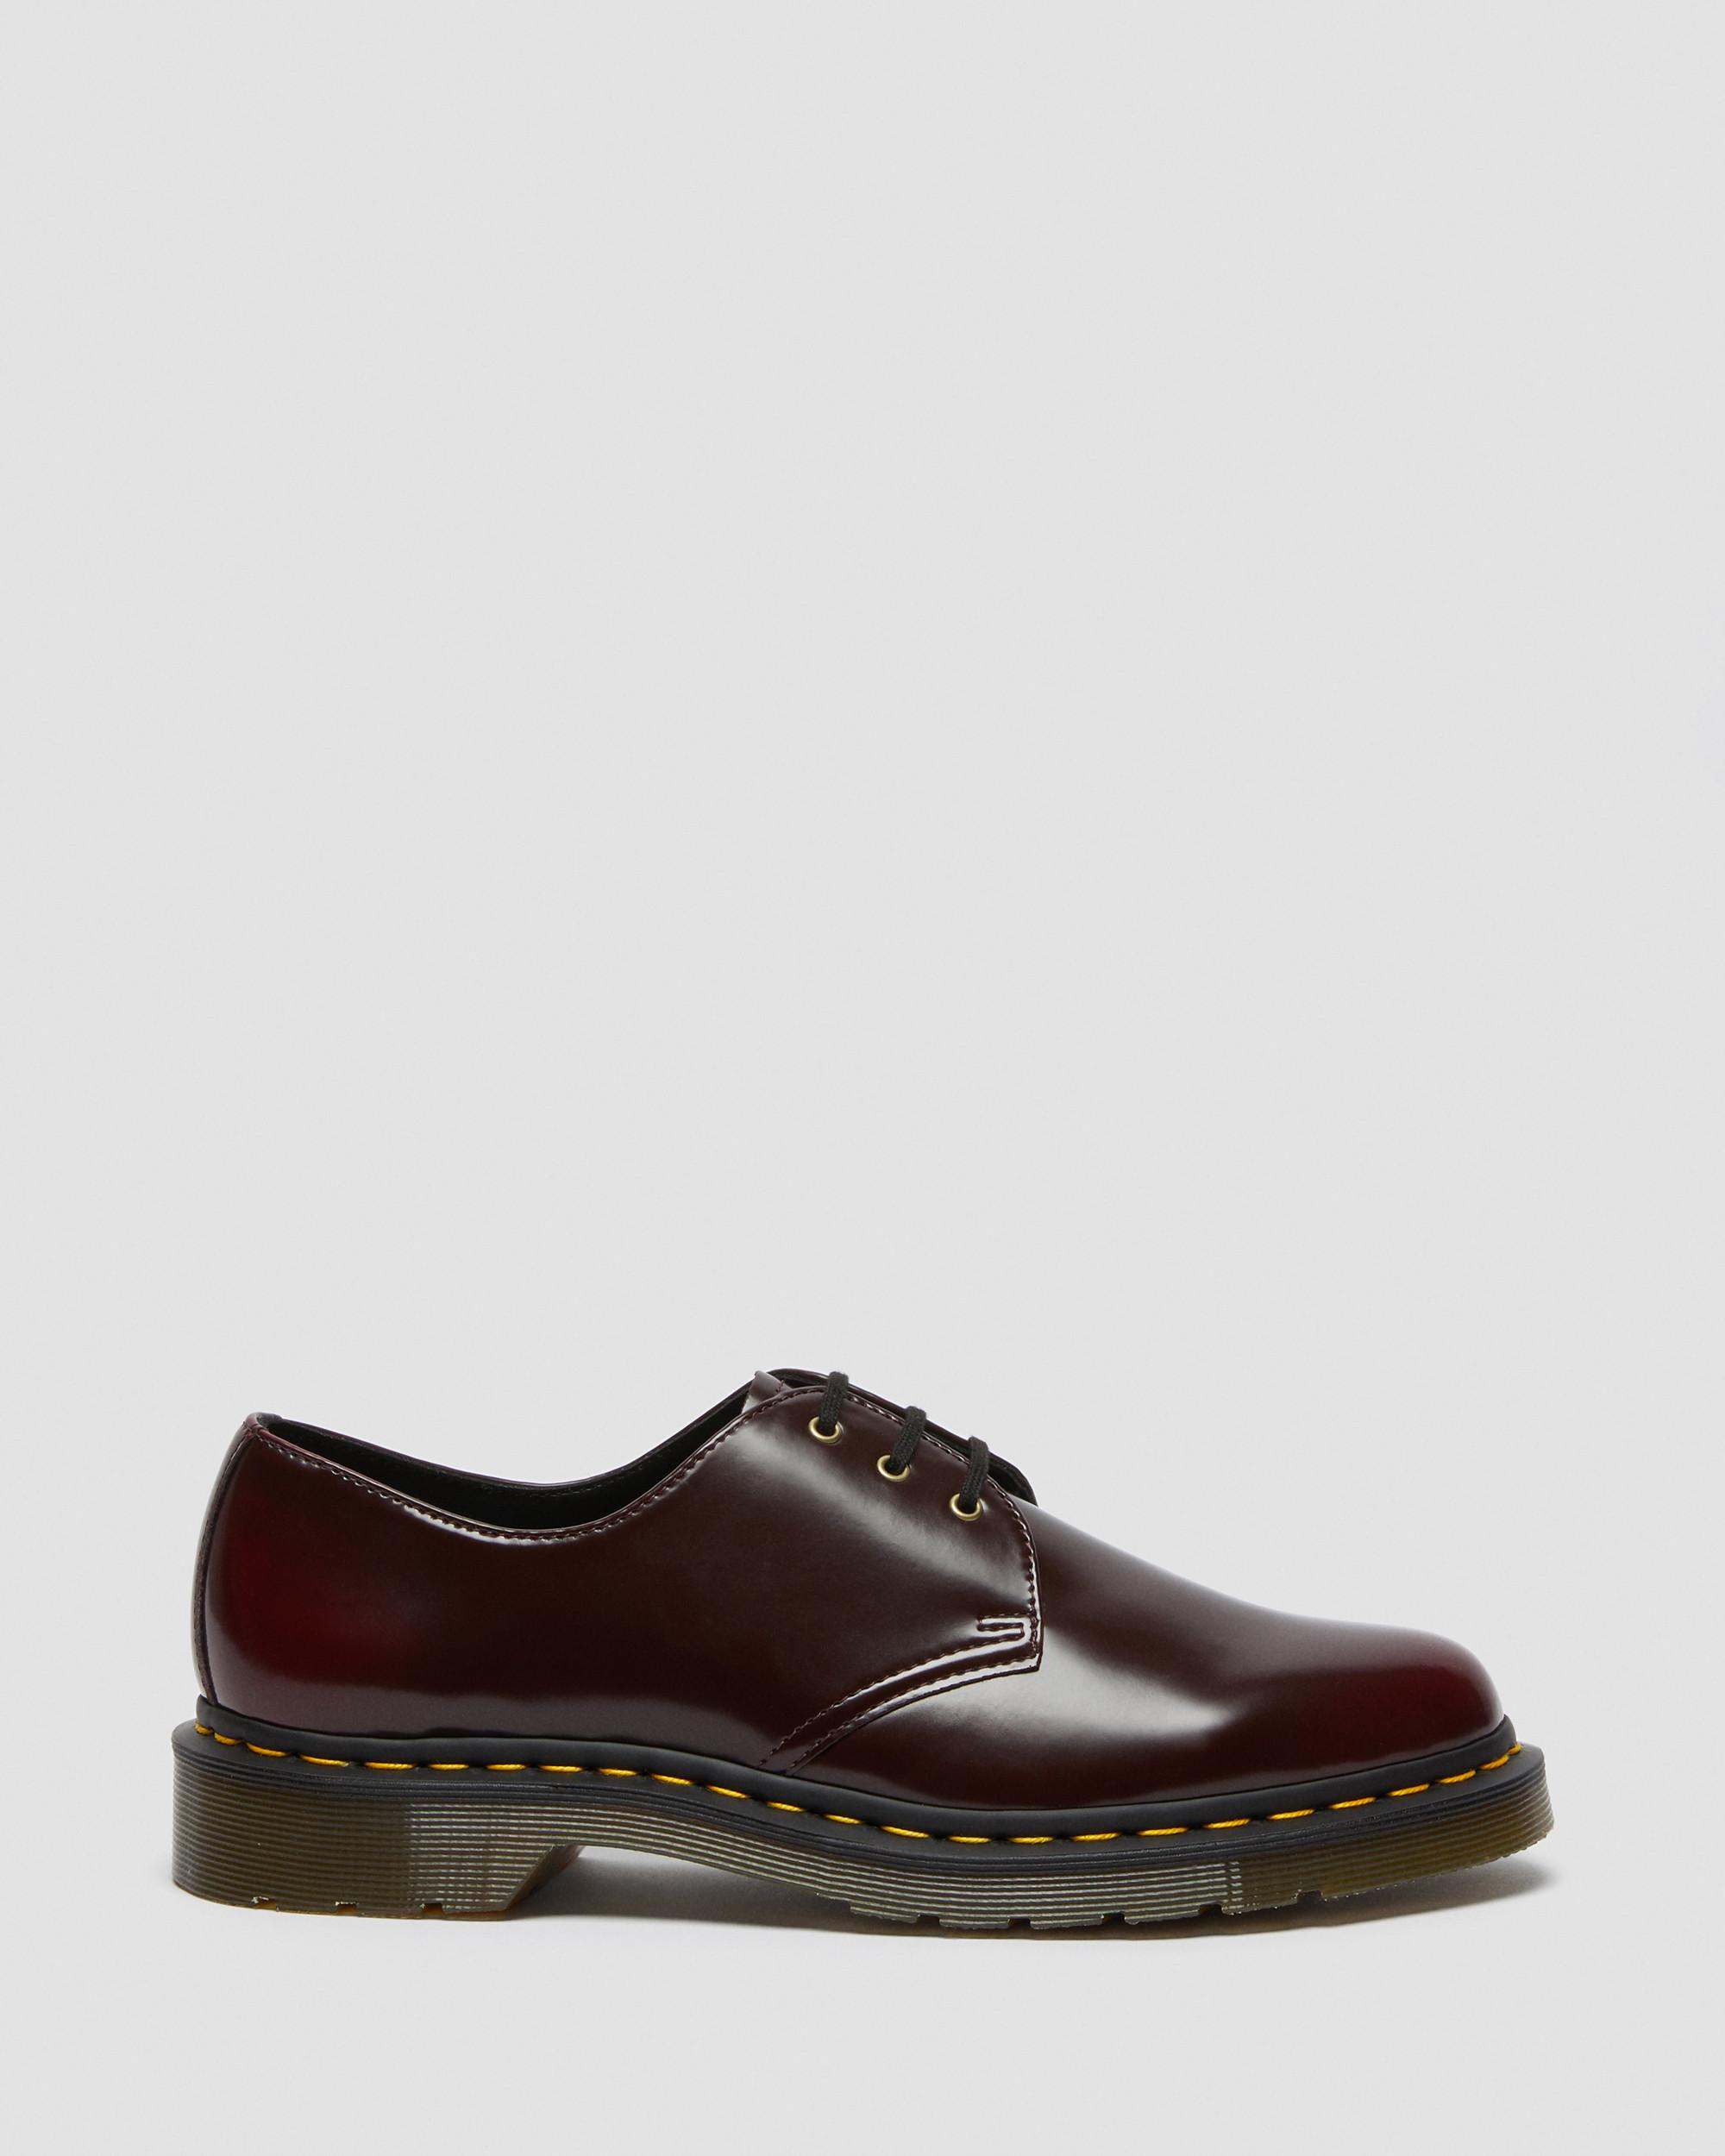 1461 Rub Off Vegan Oxford Shoes in Cherry Red